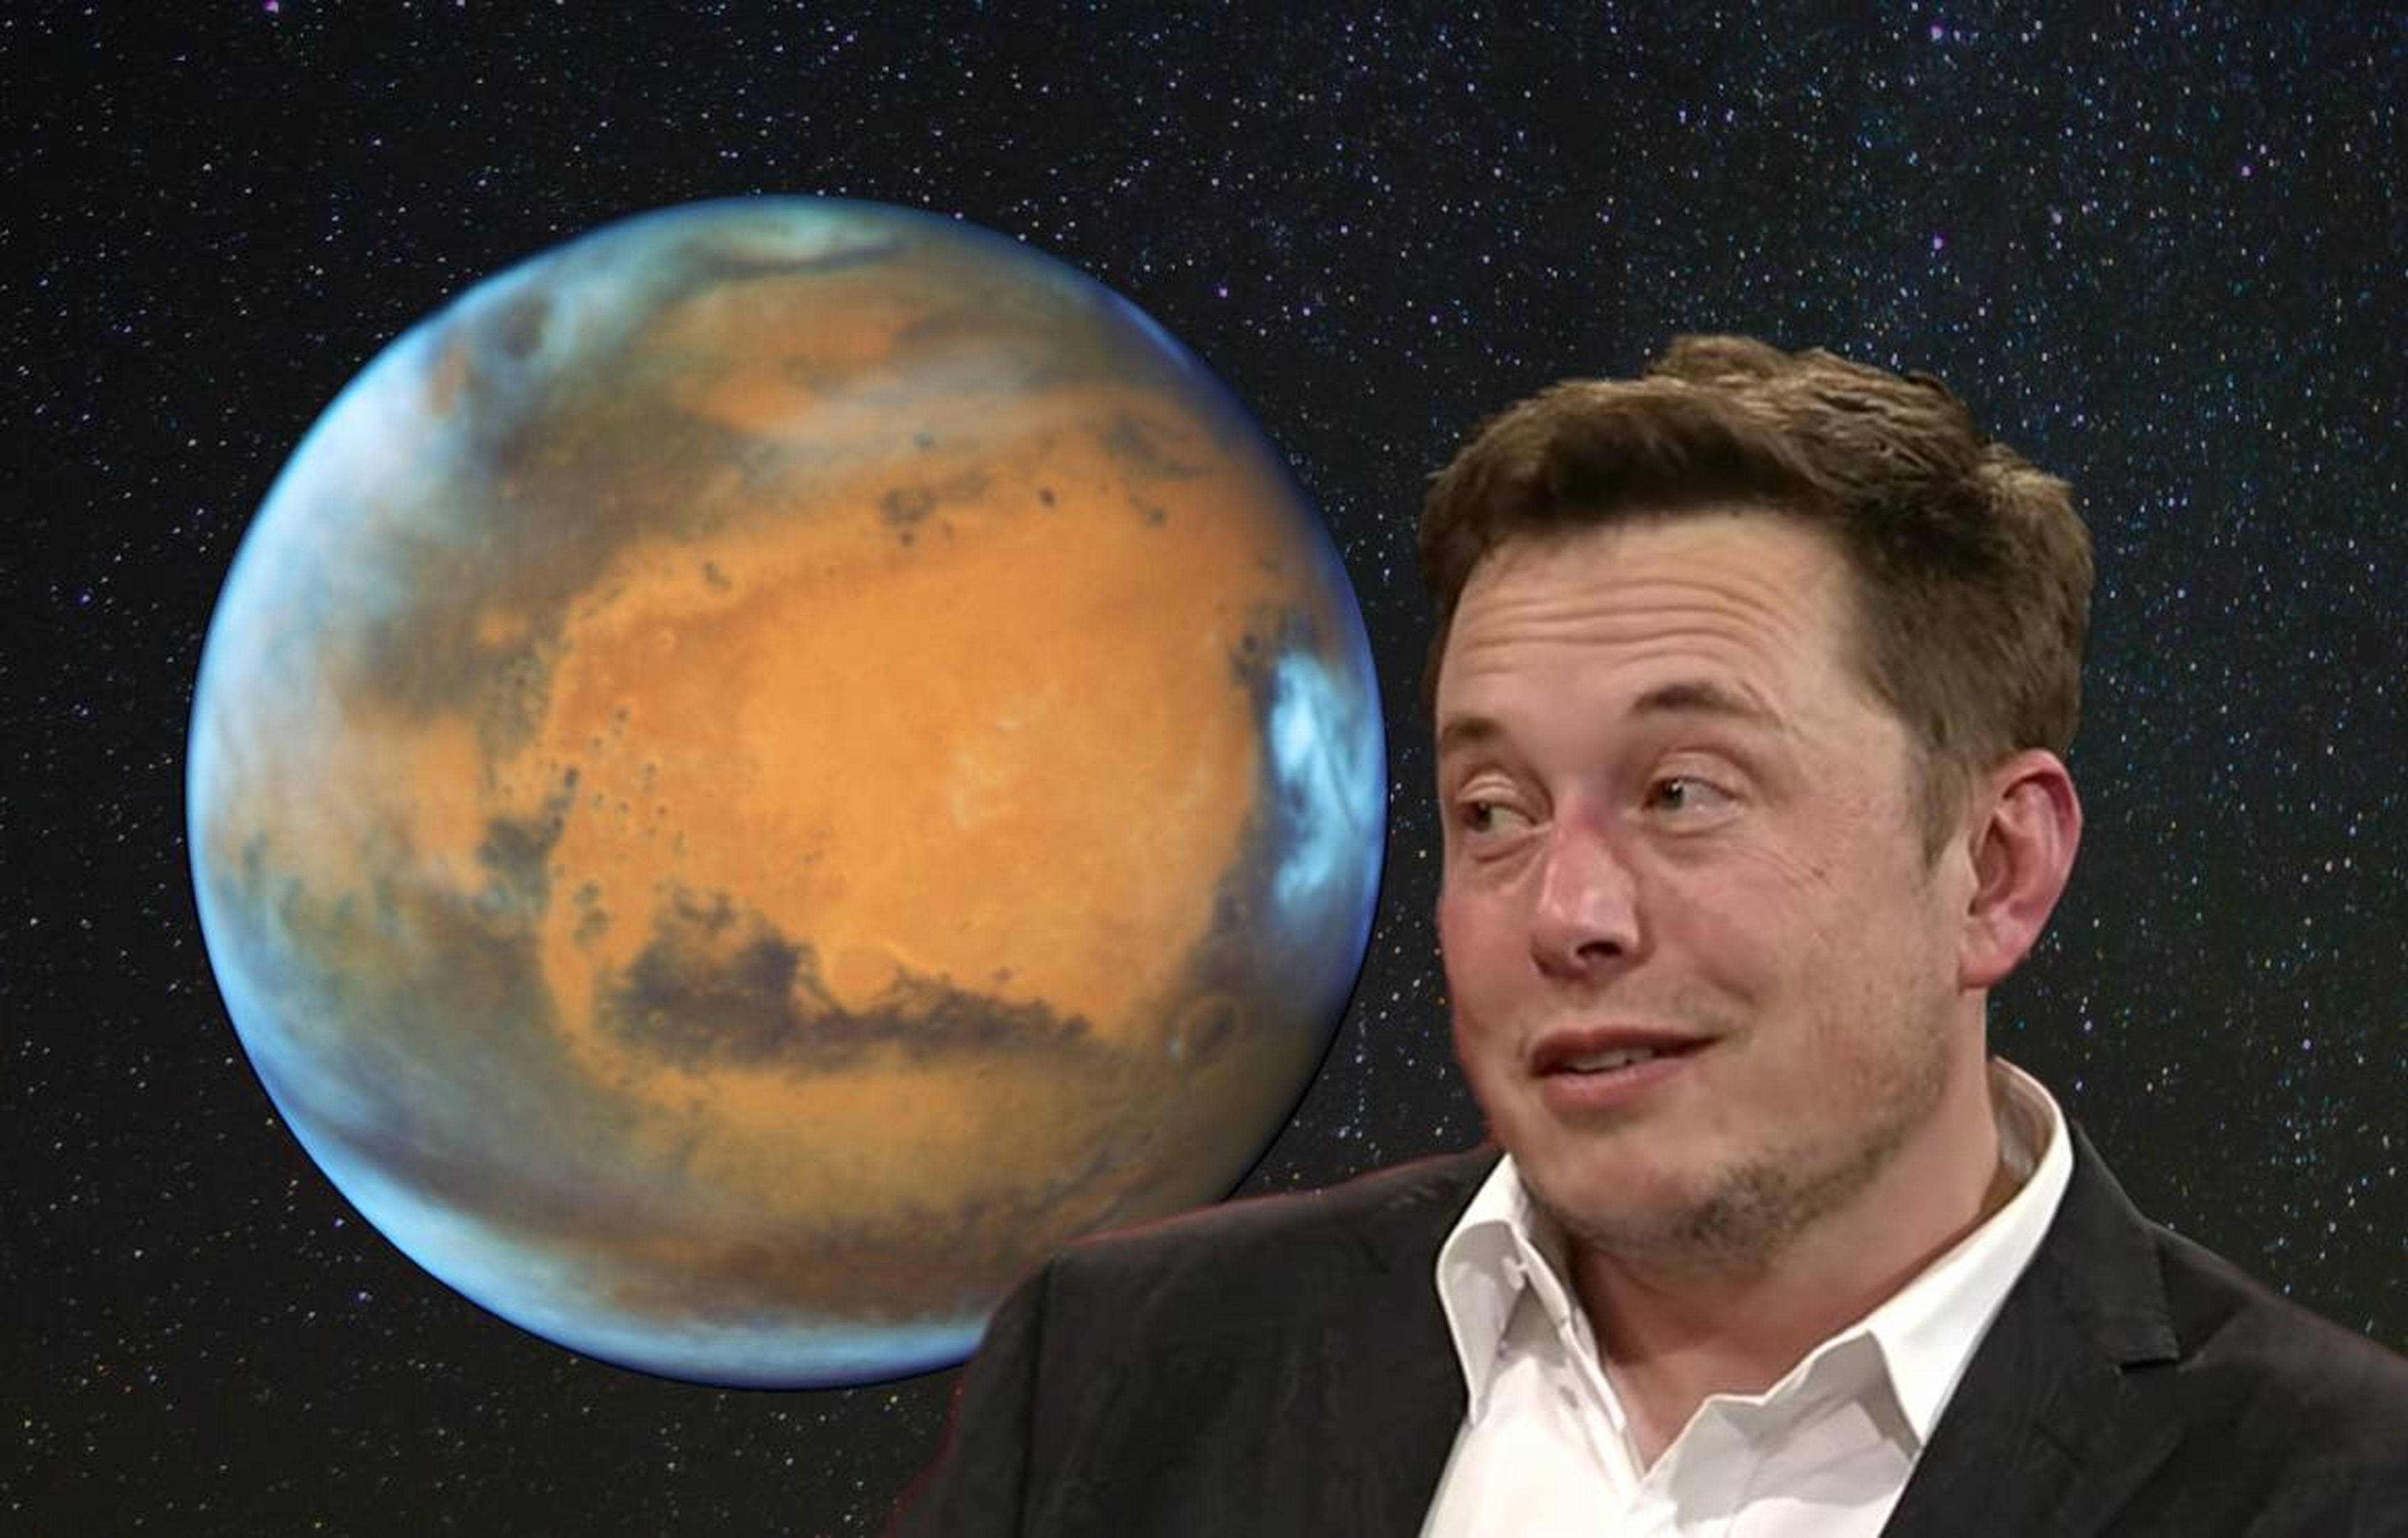 SpaceX's long-term goal is to make colonizing Mars affordable.